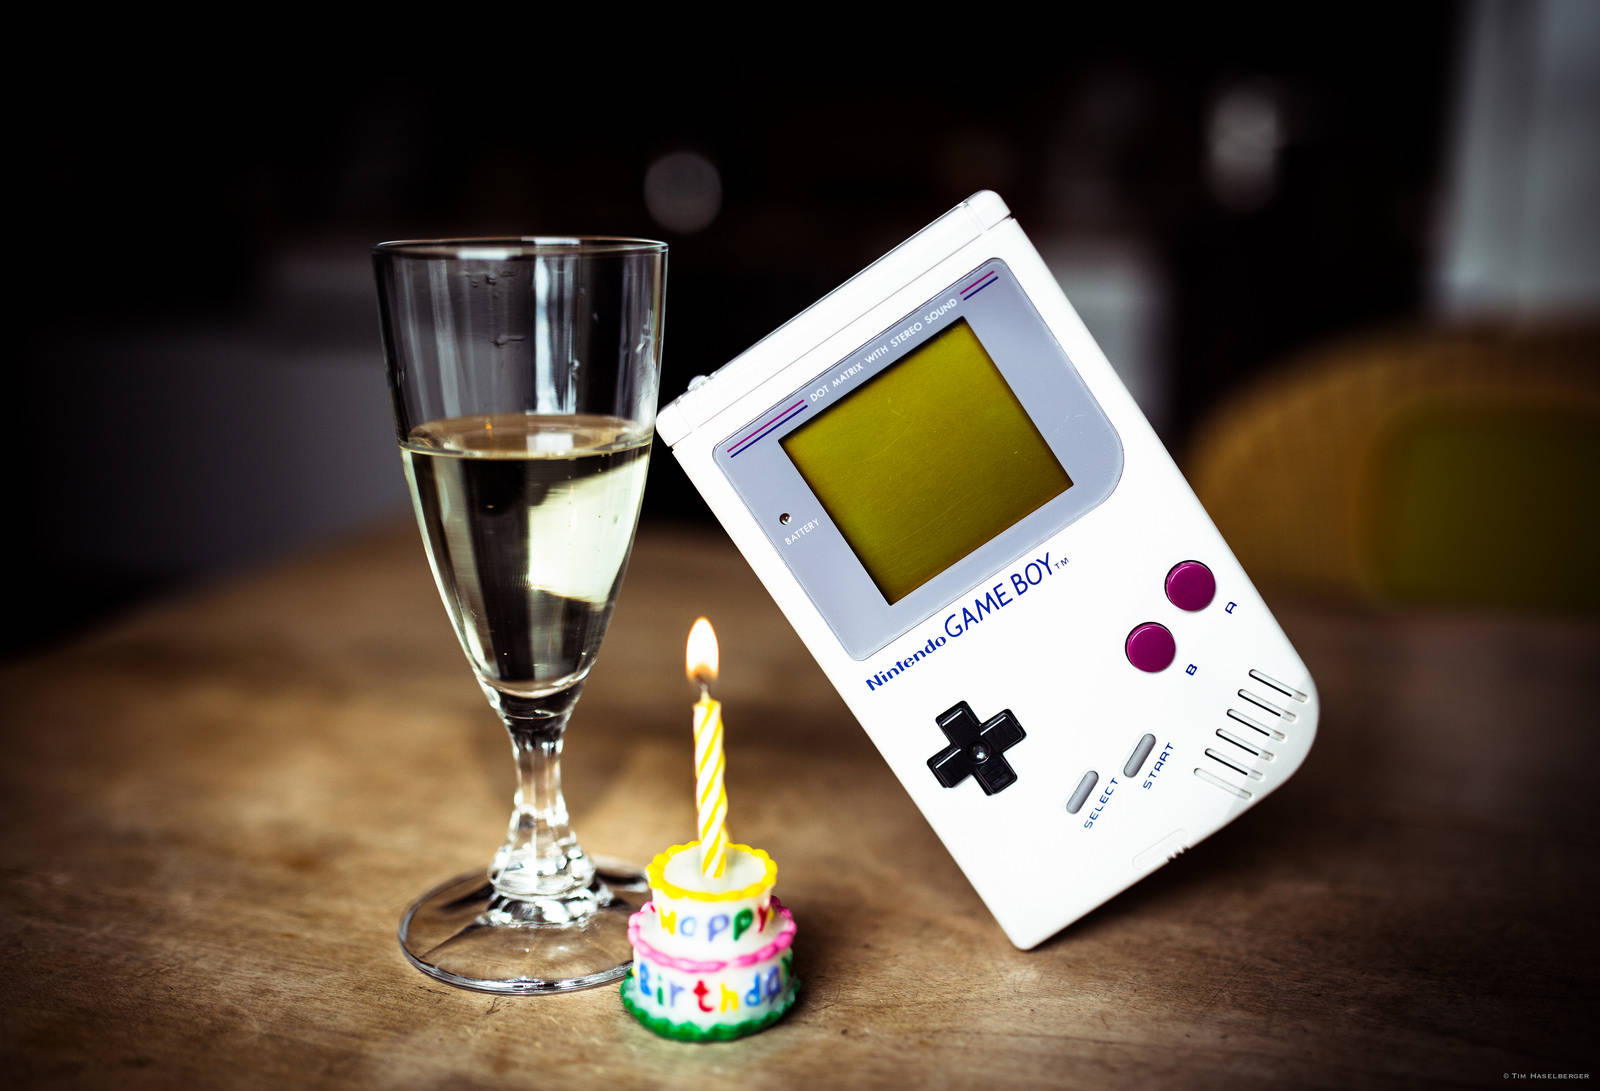 Vintage Game Boy Replica Displayed on Glass Table with a Slice of Cake Wallpaper